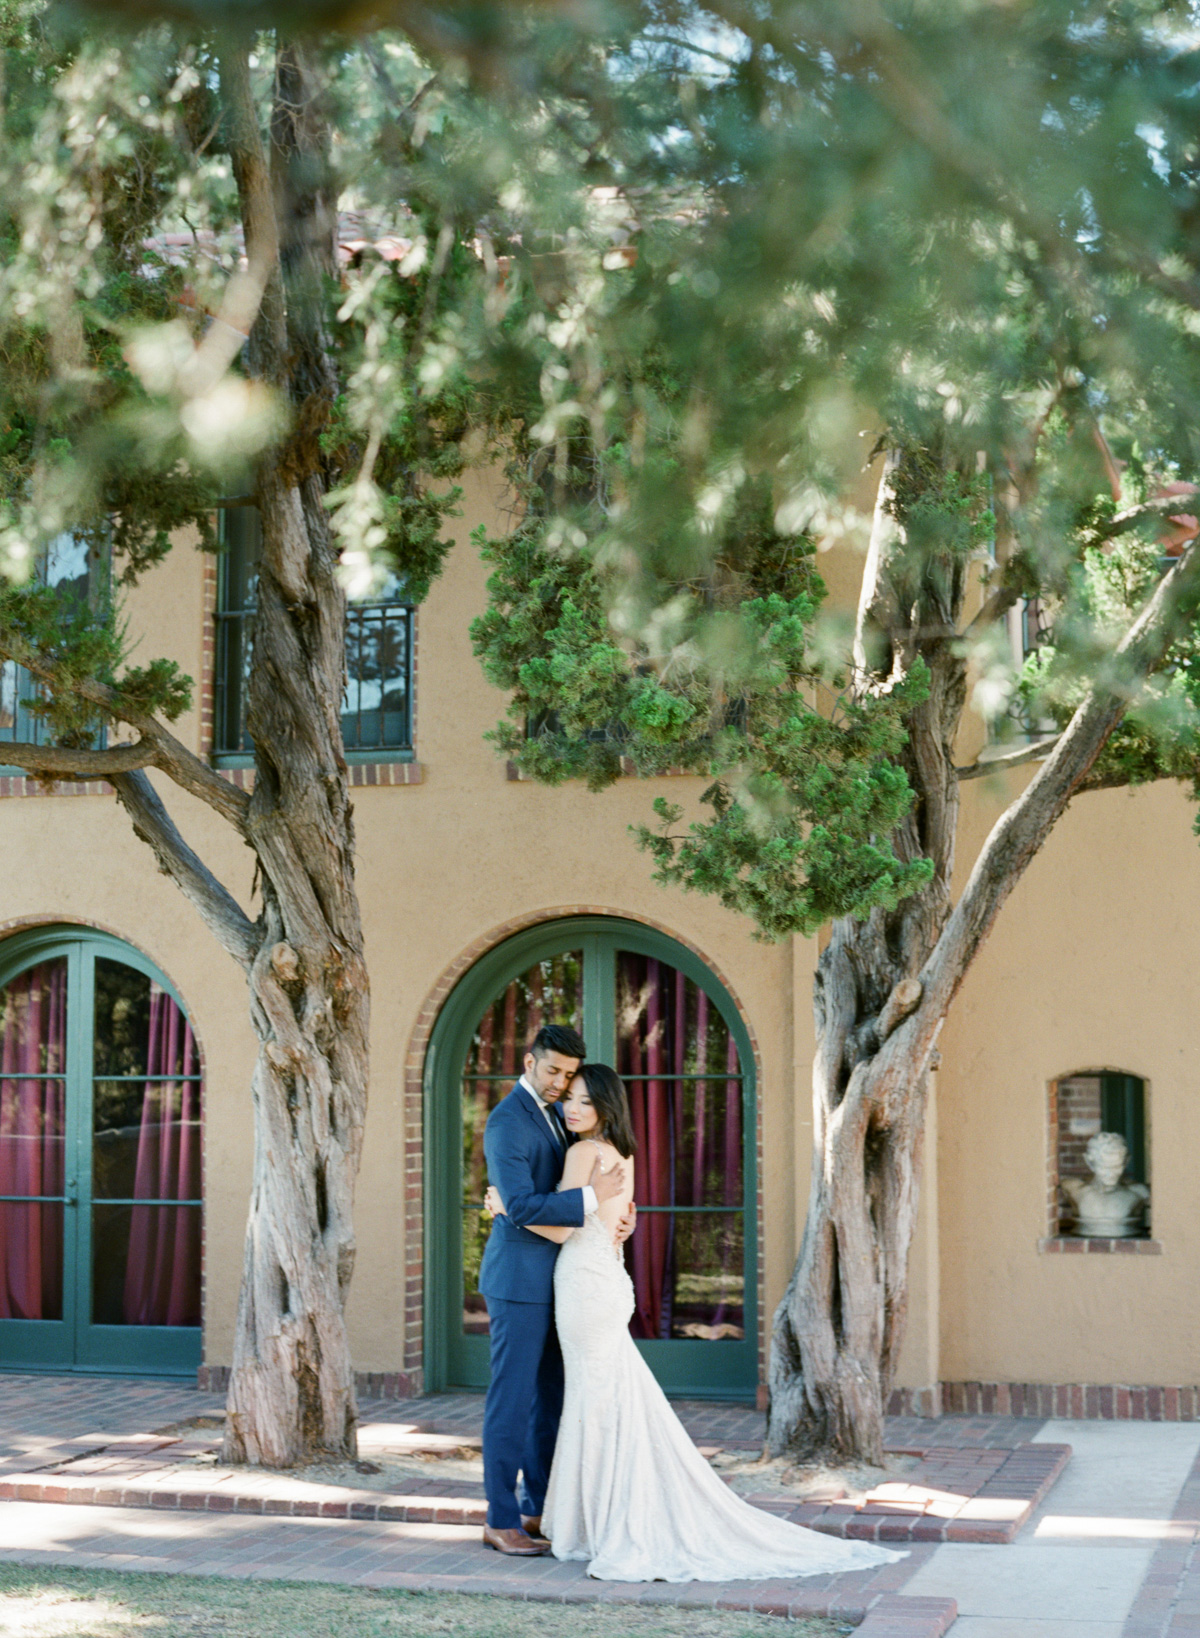 Canfield-Moreno Estate - Paramour Mansion - Los Angeles Wedding - For the Love of It-012.jpg